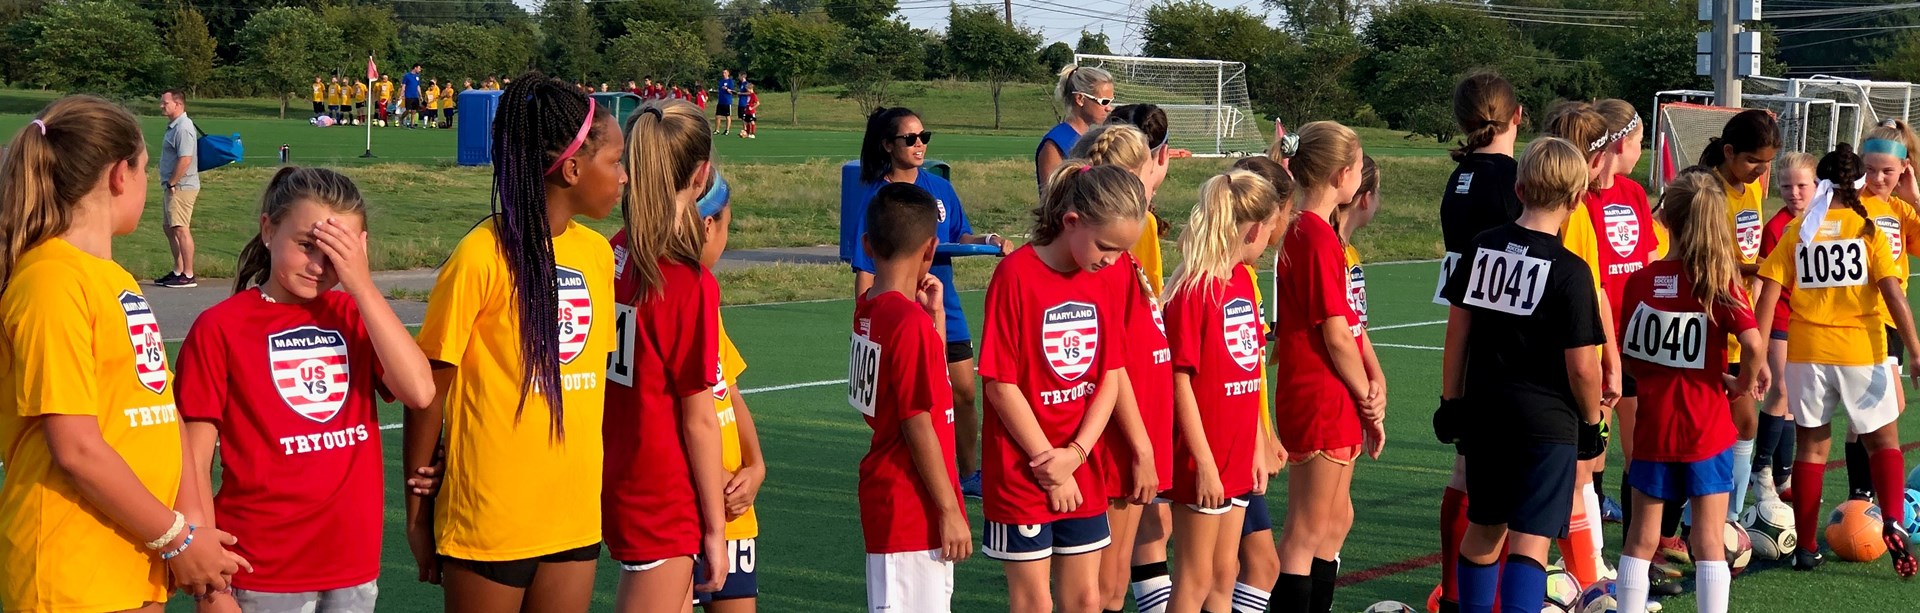 odp_tryouts_